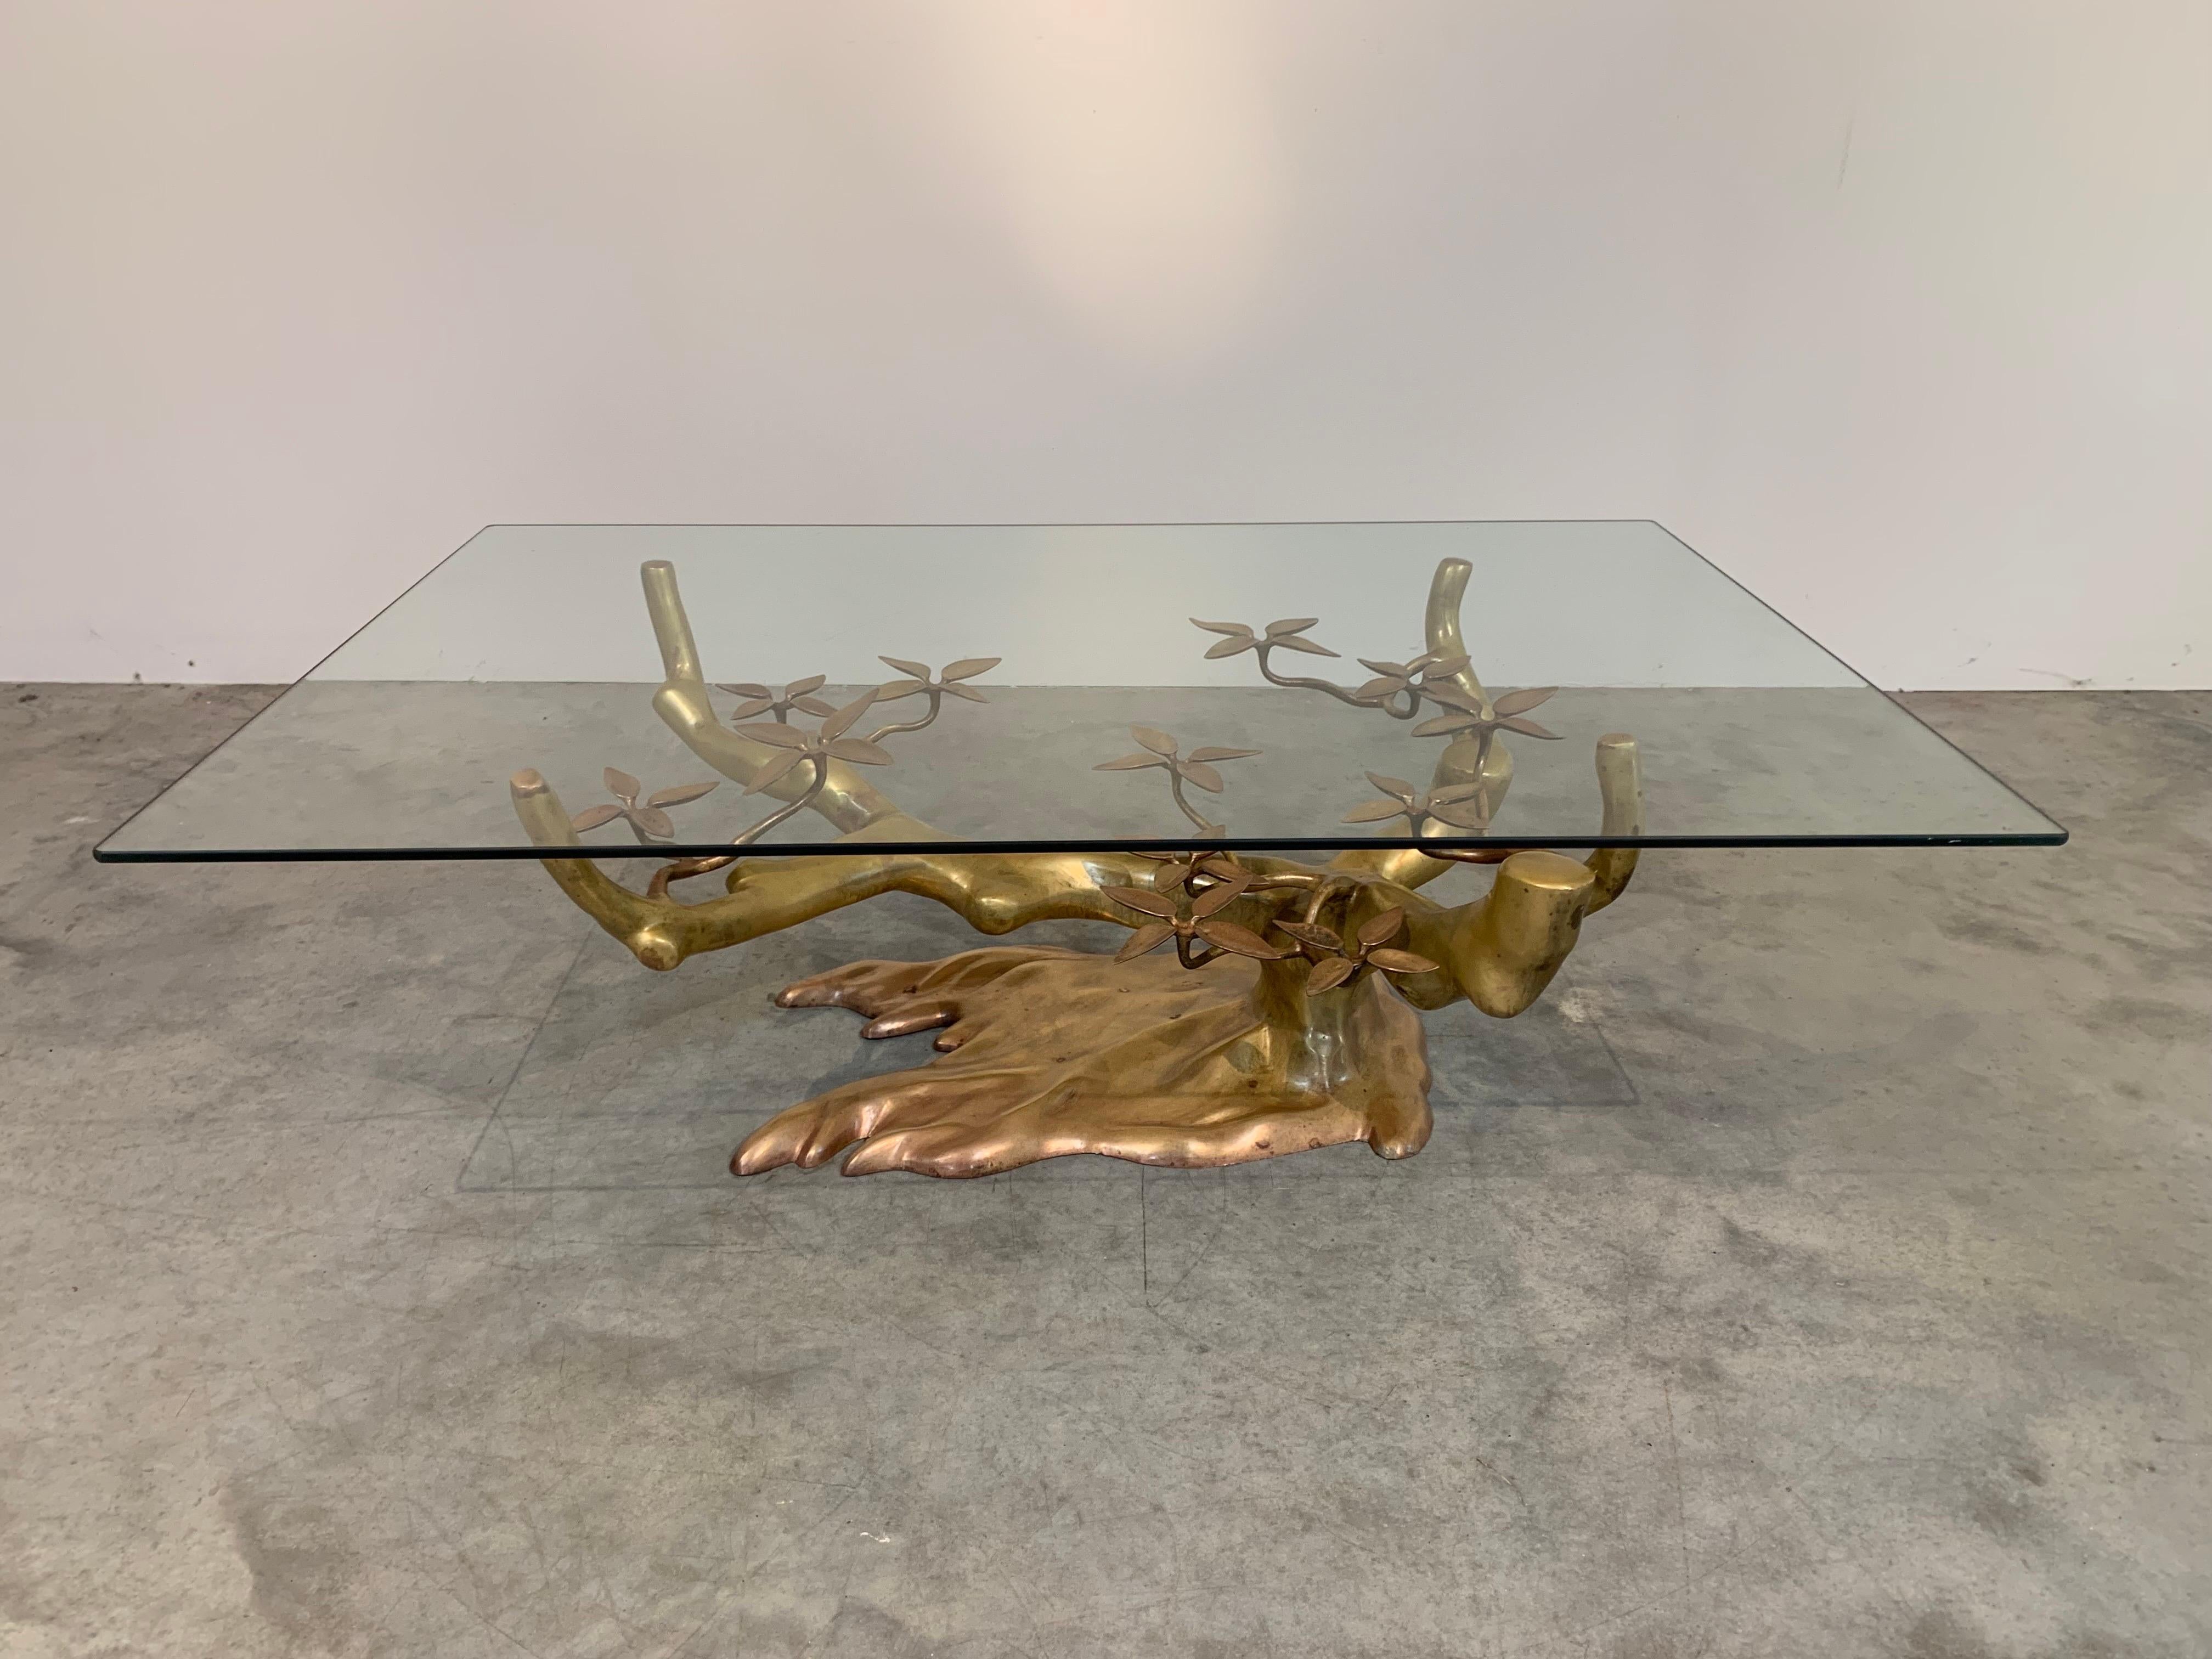 A beautiful sculptural brass coffee table designed by Willy Daro and manufactured in Belgium circa 1970 having ‘Bonsai’ sculpture base under tempered glass. 
In outstanding vintage condition. Freshly polished and glass cleaned. 
16.5x46.5x30.75” HWD